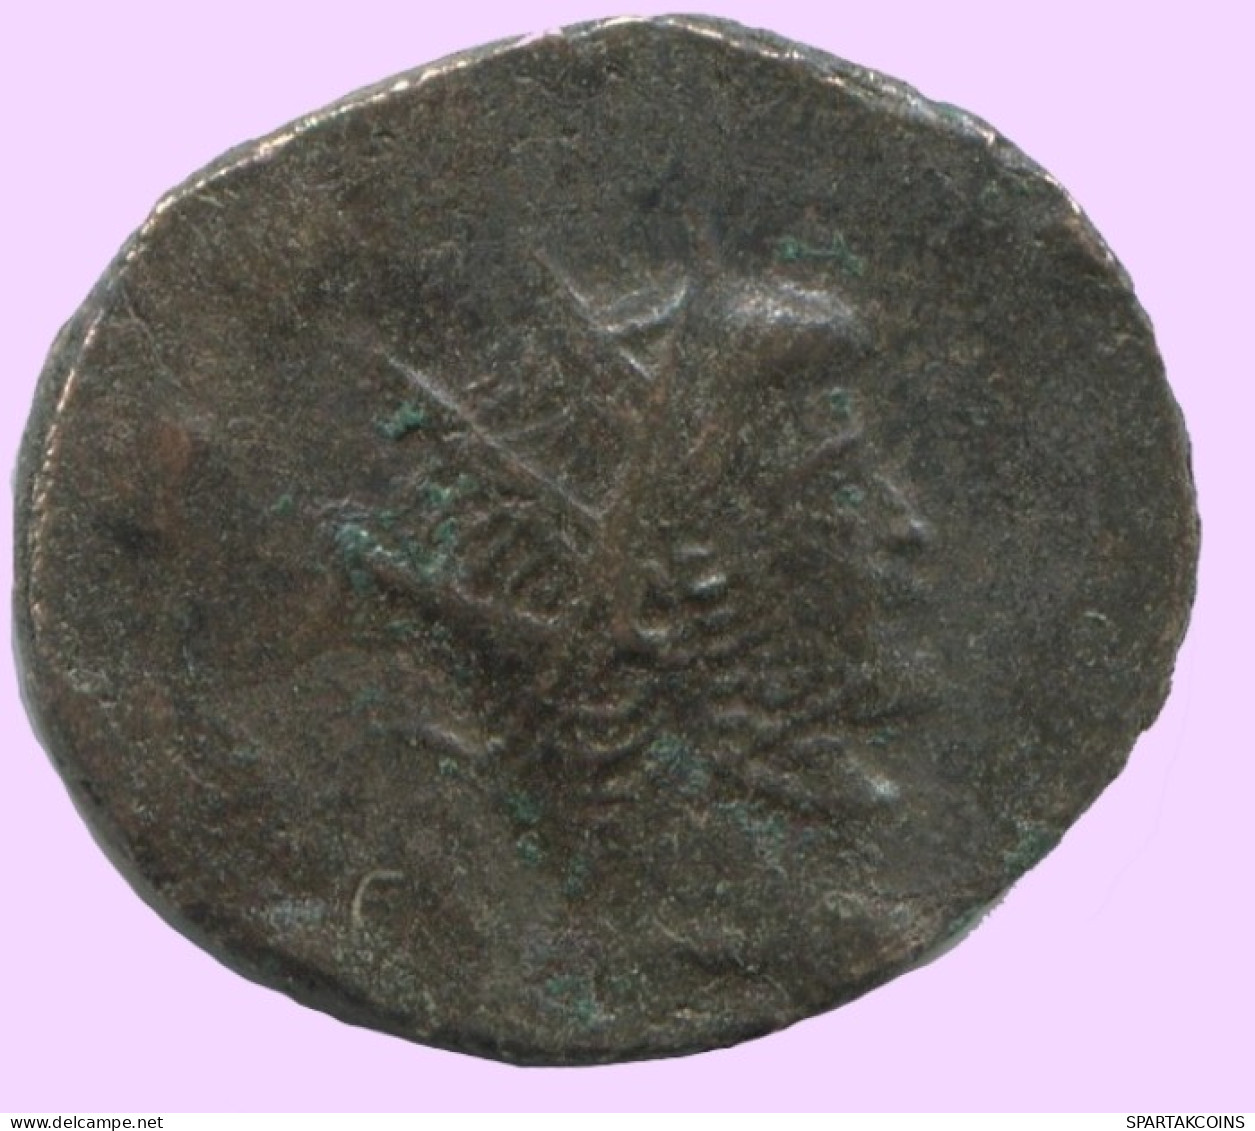 LATE ROMAN EMPIRE Follis Antique Authentique Roman Pièce 2.1g/16mm #ANT2006.7.F.A - The End Of Empire (363 AD To 476 AD)